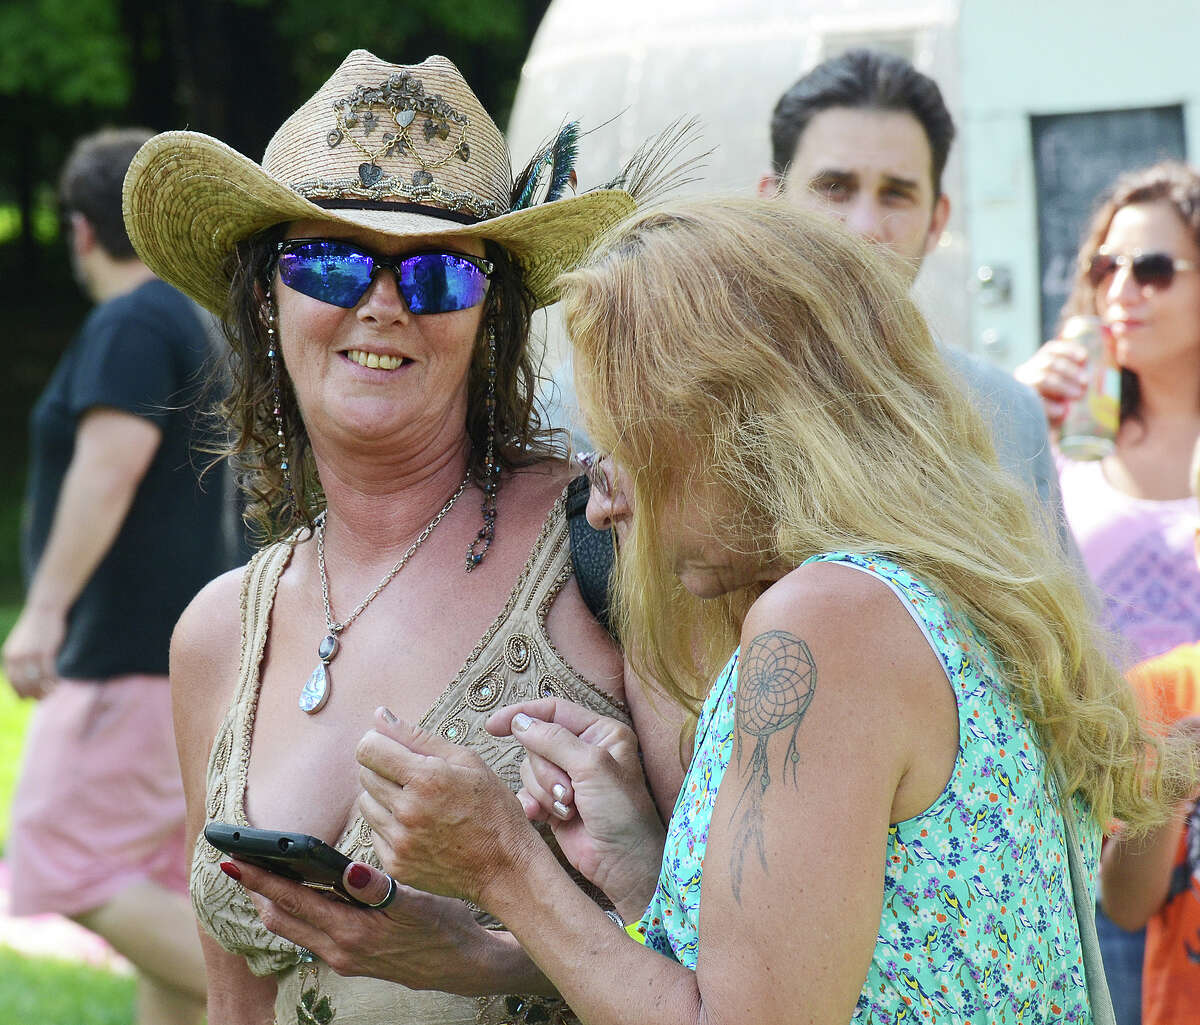 Scenes from the second annual Forever Grateful Music Festival at the Ives Concert Center in Danbury on August 20, 2016. Over 10 bands performed on two stages celebrating the music of The Grateful Dead, Allman Brothers, Bob Marley, and more. Festival goers enjoyed food, exhibitors and dancing.